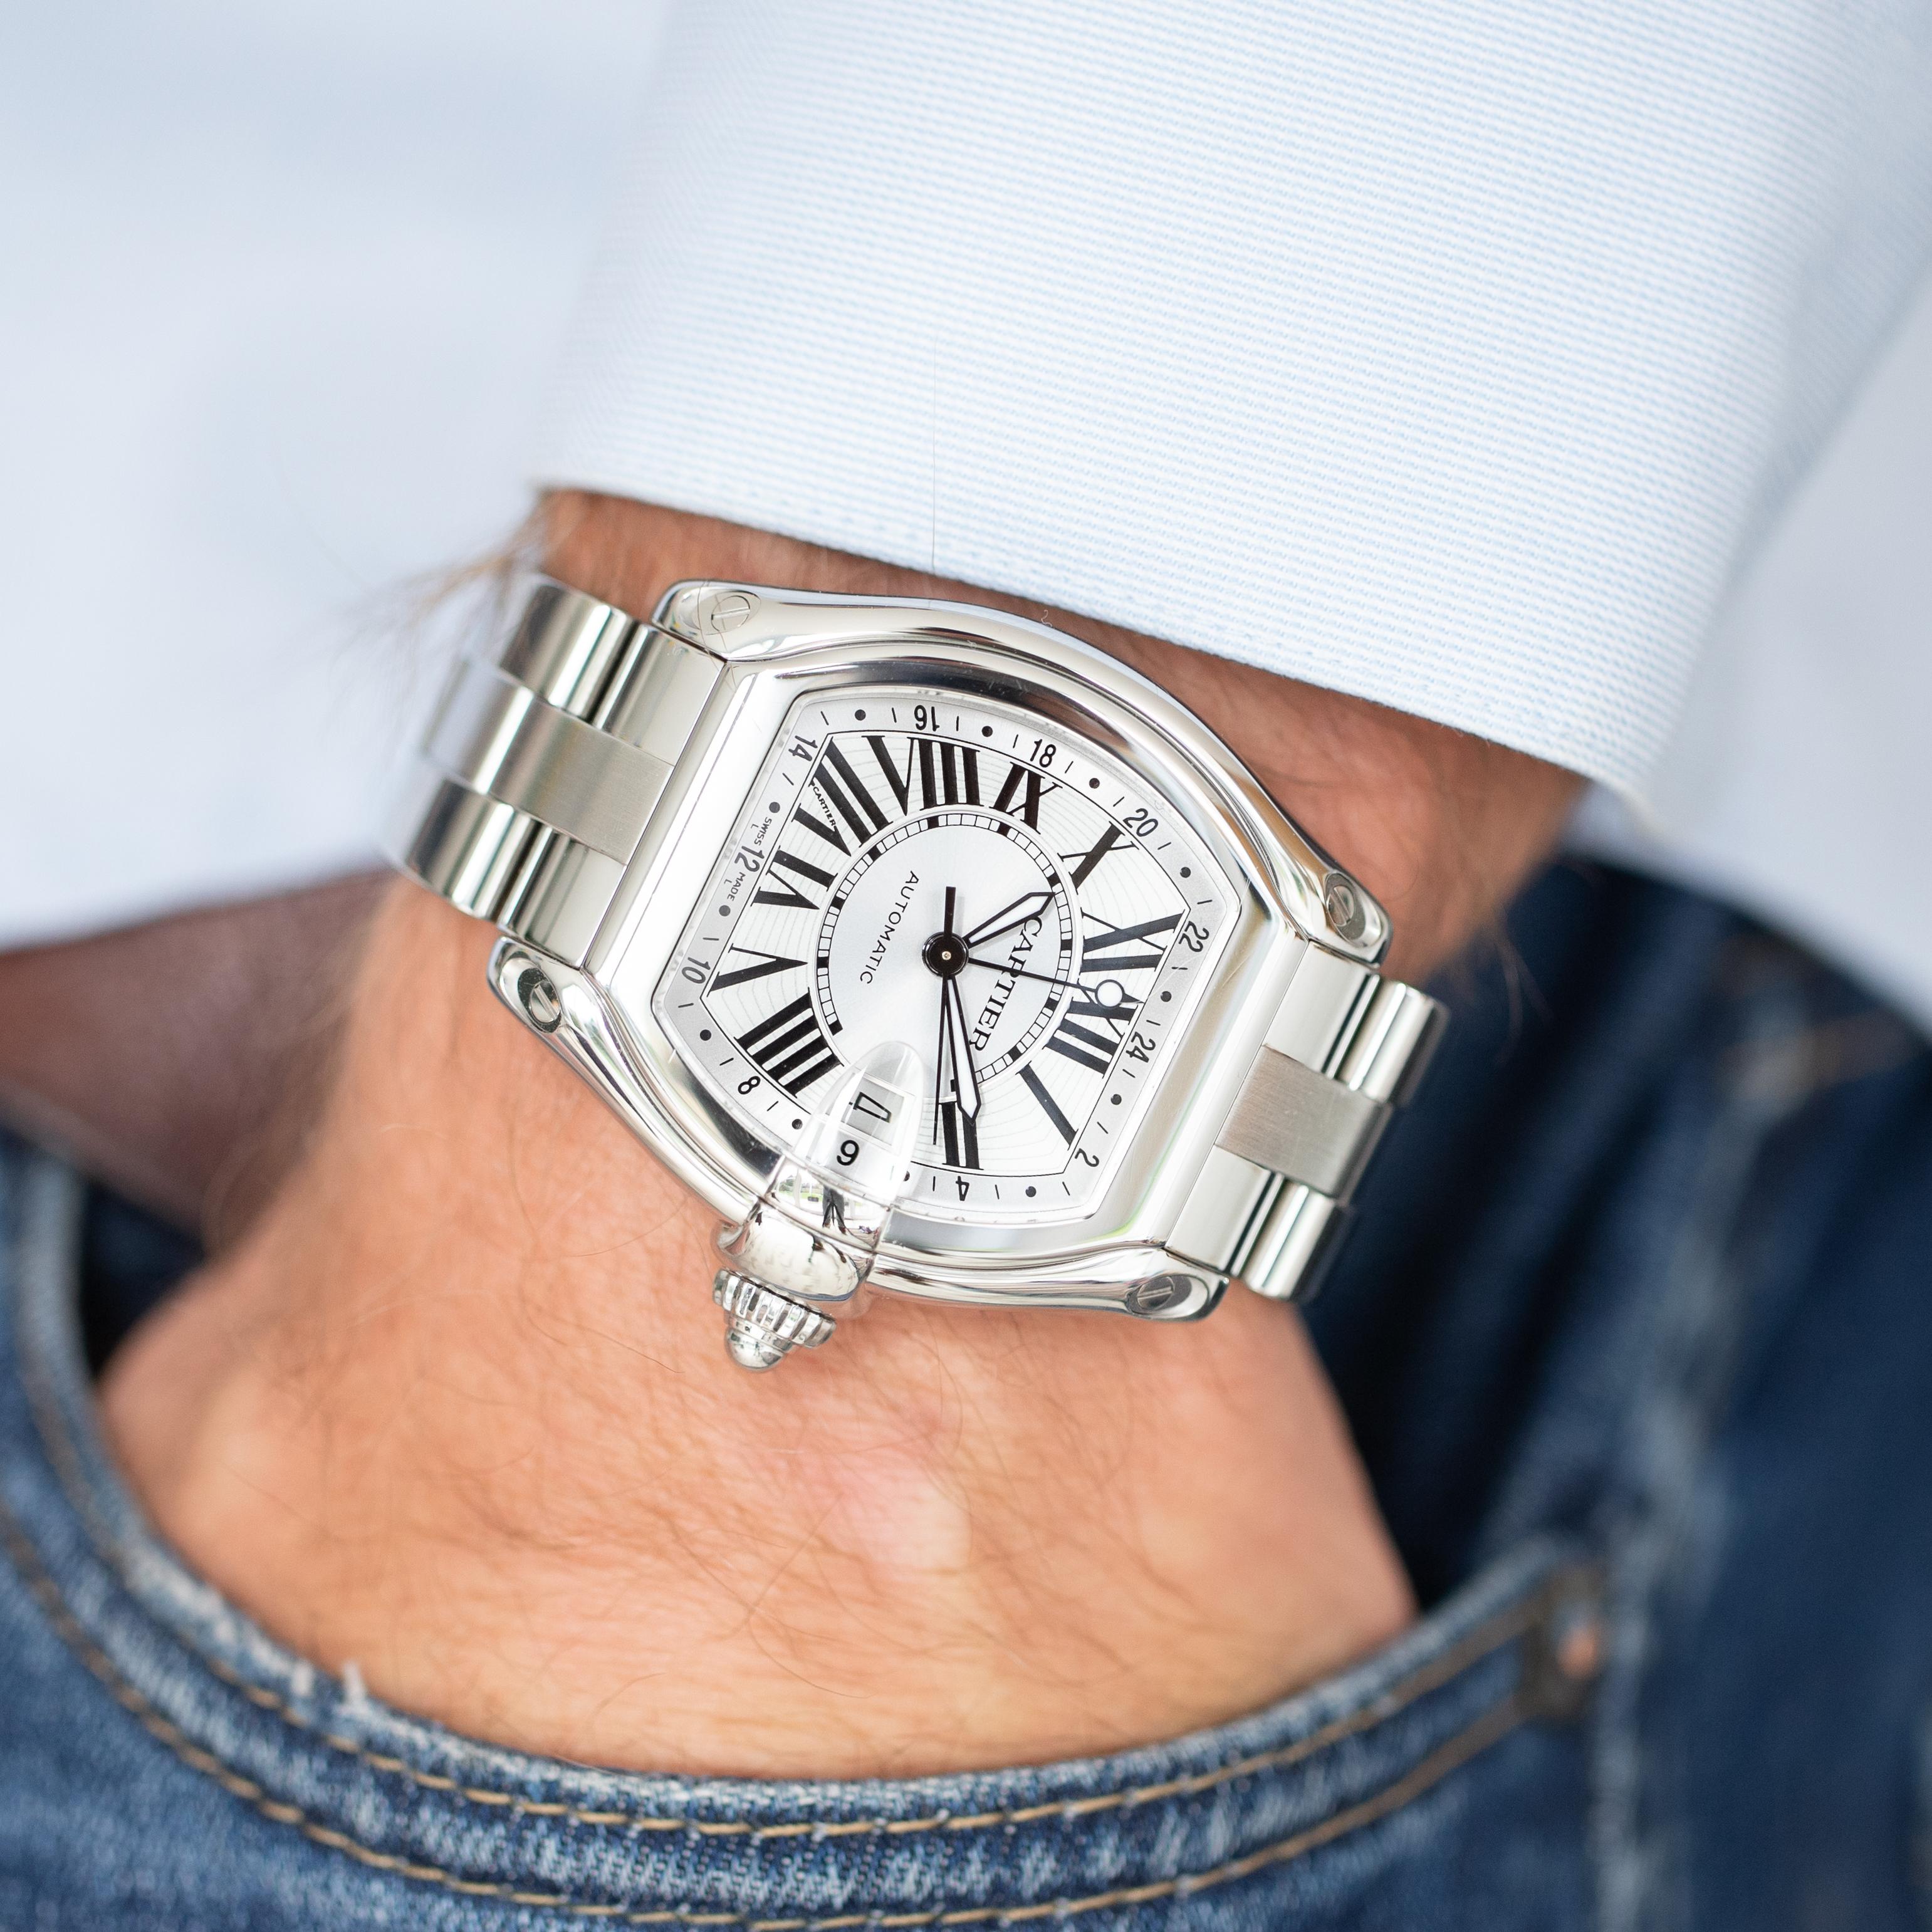 For sale is a very recognisable and stunningly eccentric timepiece: a Cartier Roadster GMT XL with reference number 2722. It dates back to the mid 2000s, featuring an intriguingly oversize tonneau shaped stainless steel case measuring 42mm wide and